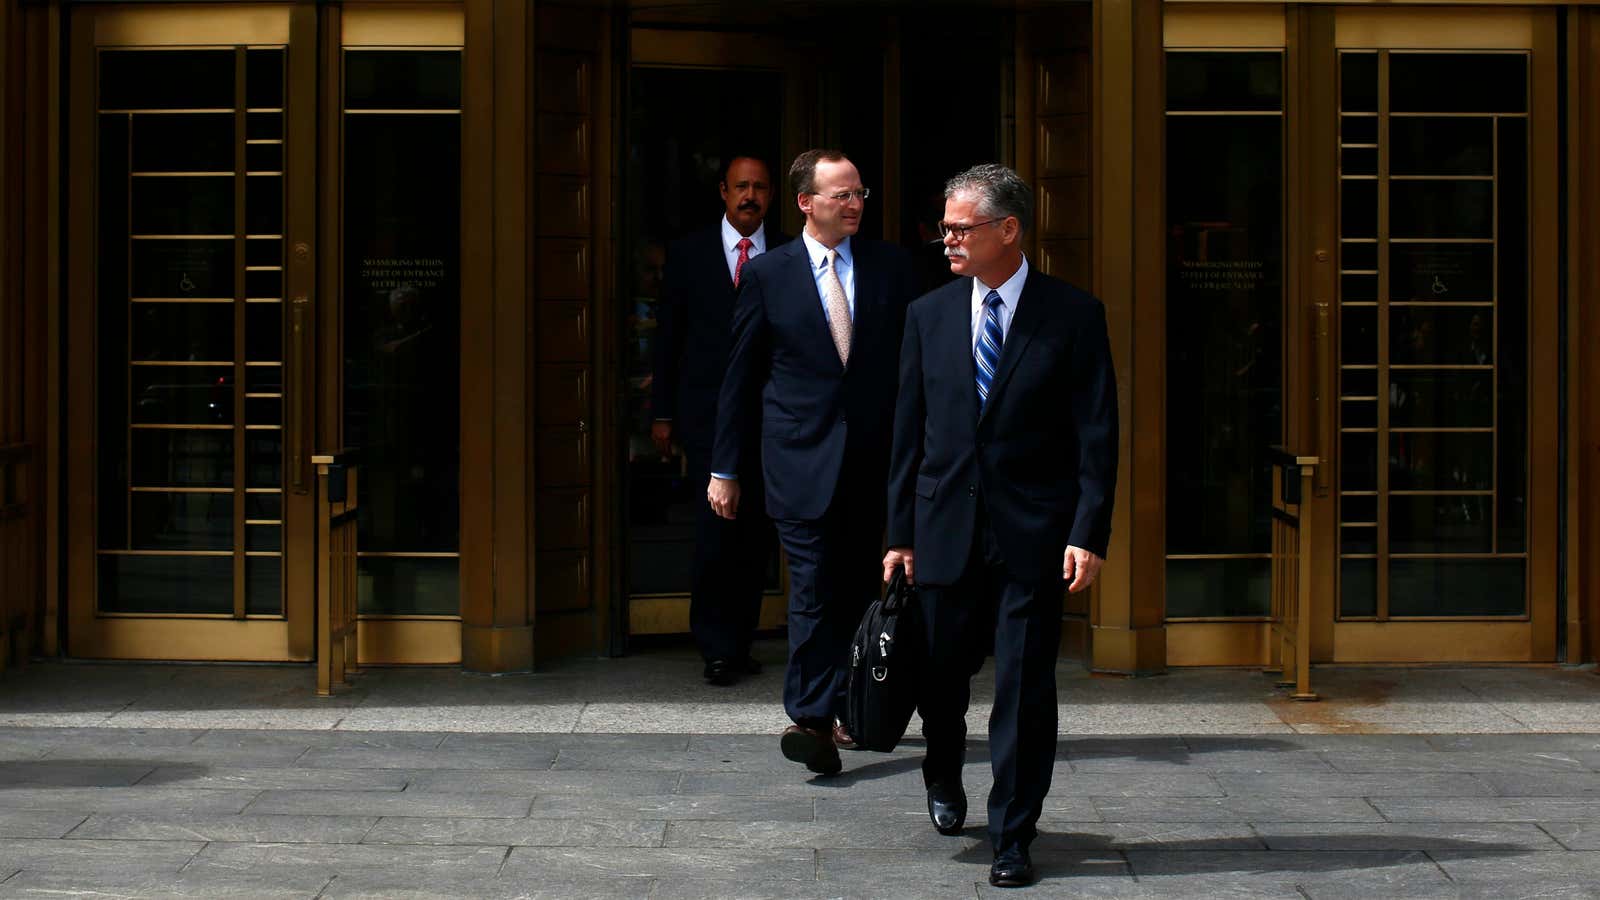 SAC Capital Advisors’ defense attorneys leave federal court in New York.